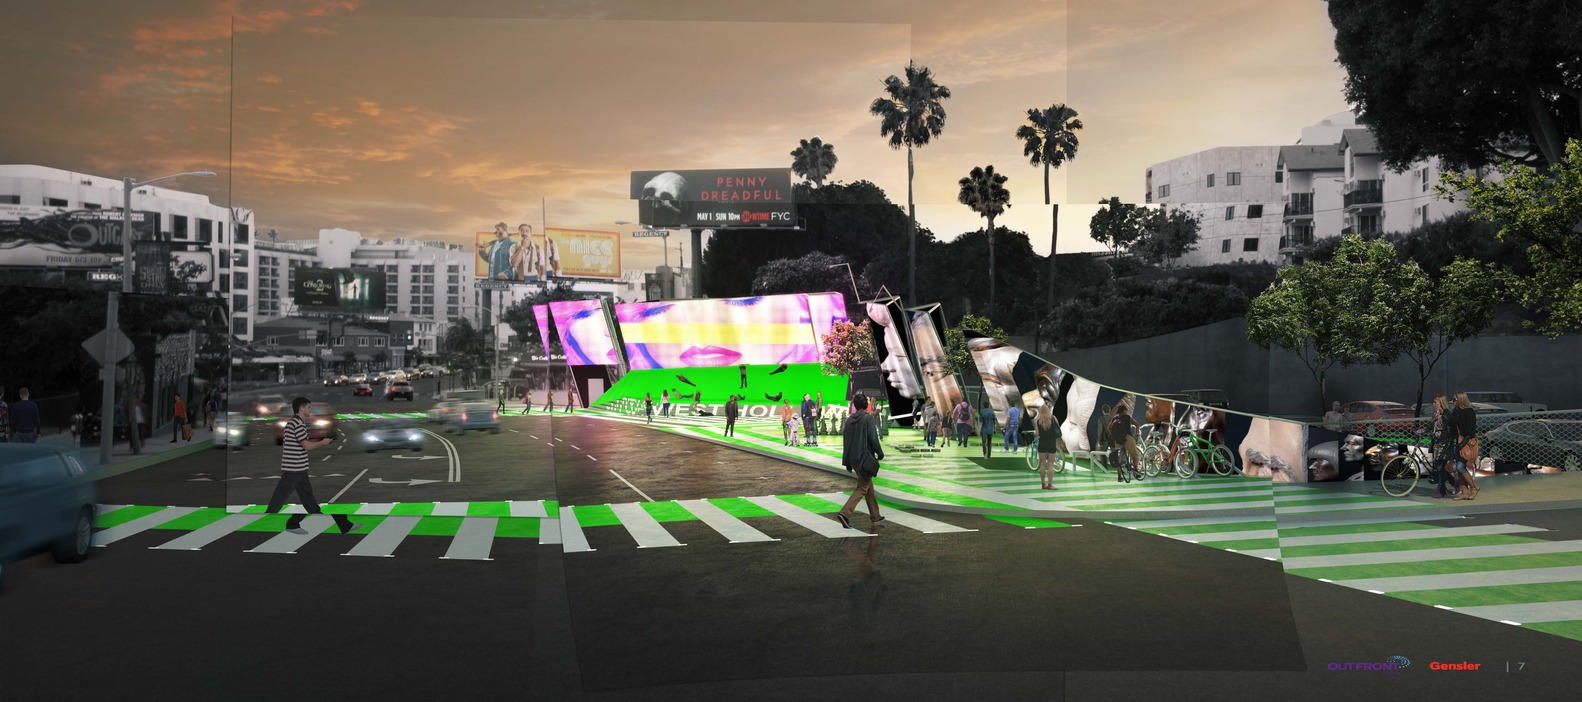 Outfront Media with Gensler + Mak Center - Now Playing Sunset / Source: City of West Hollywood